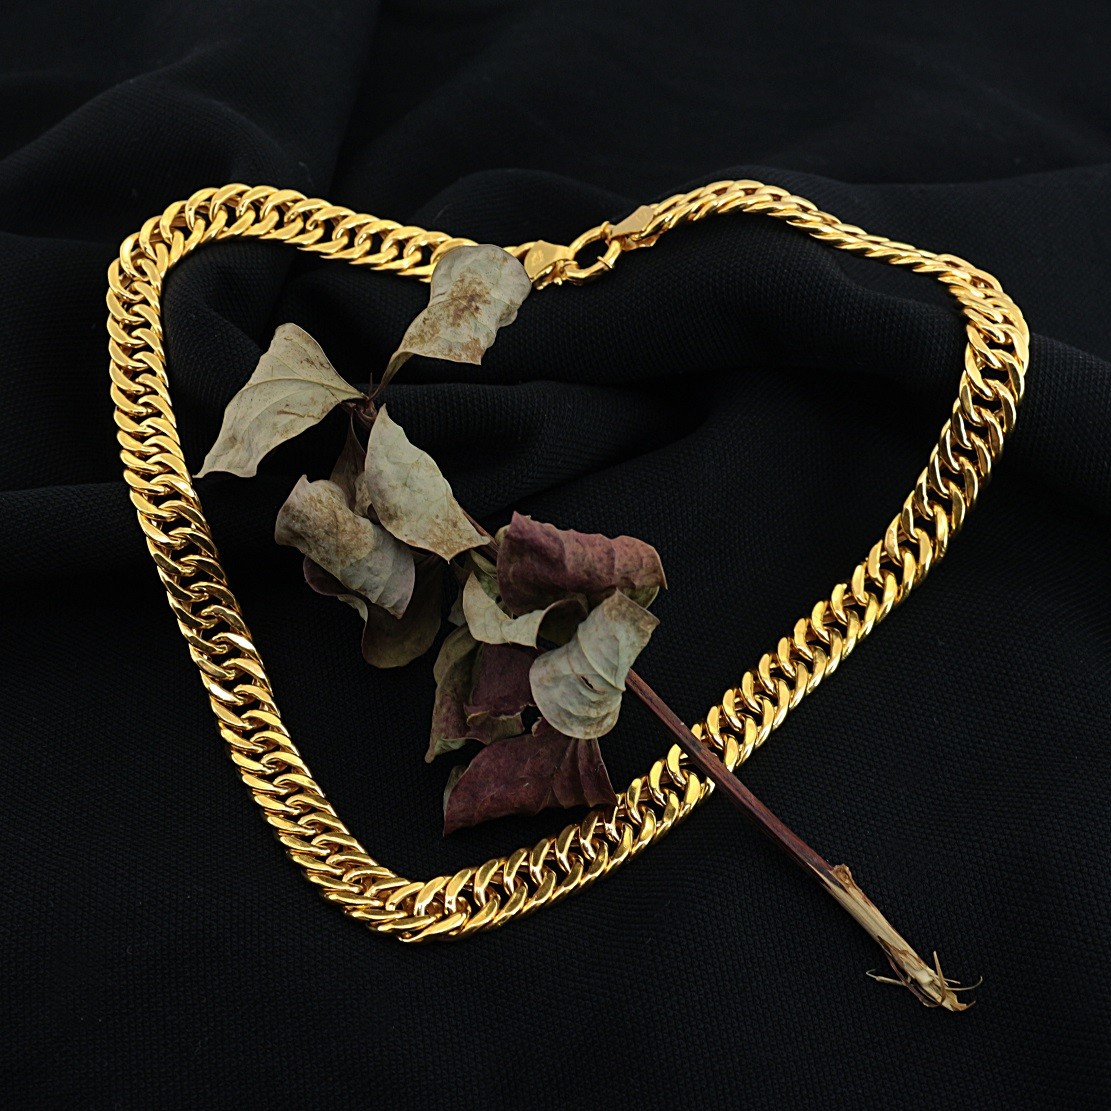 22K Gourmet Chain Necklace